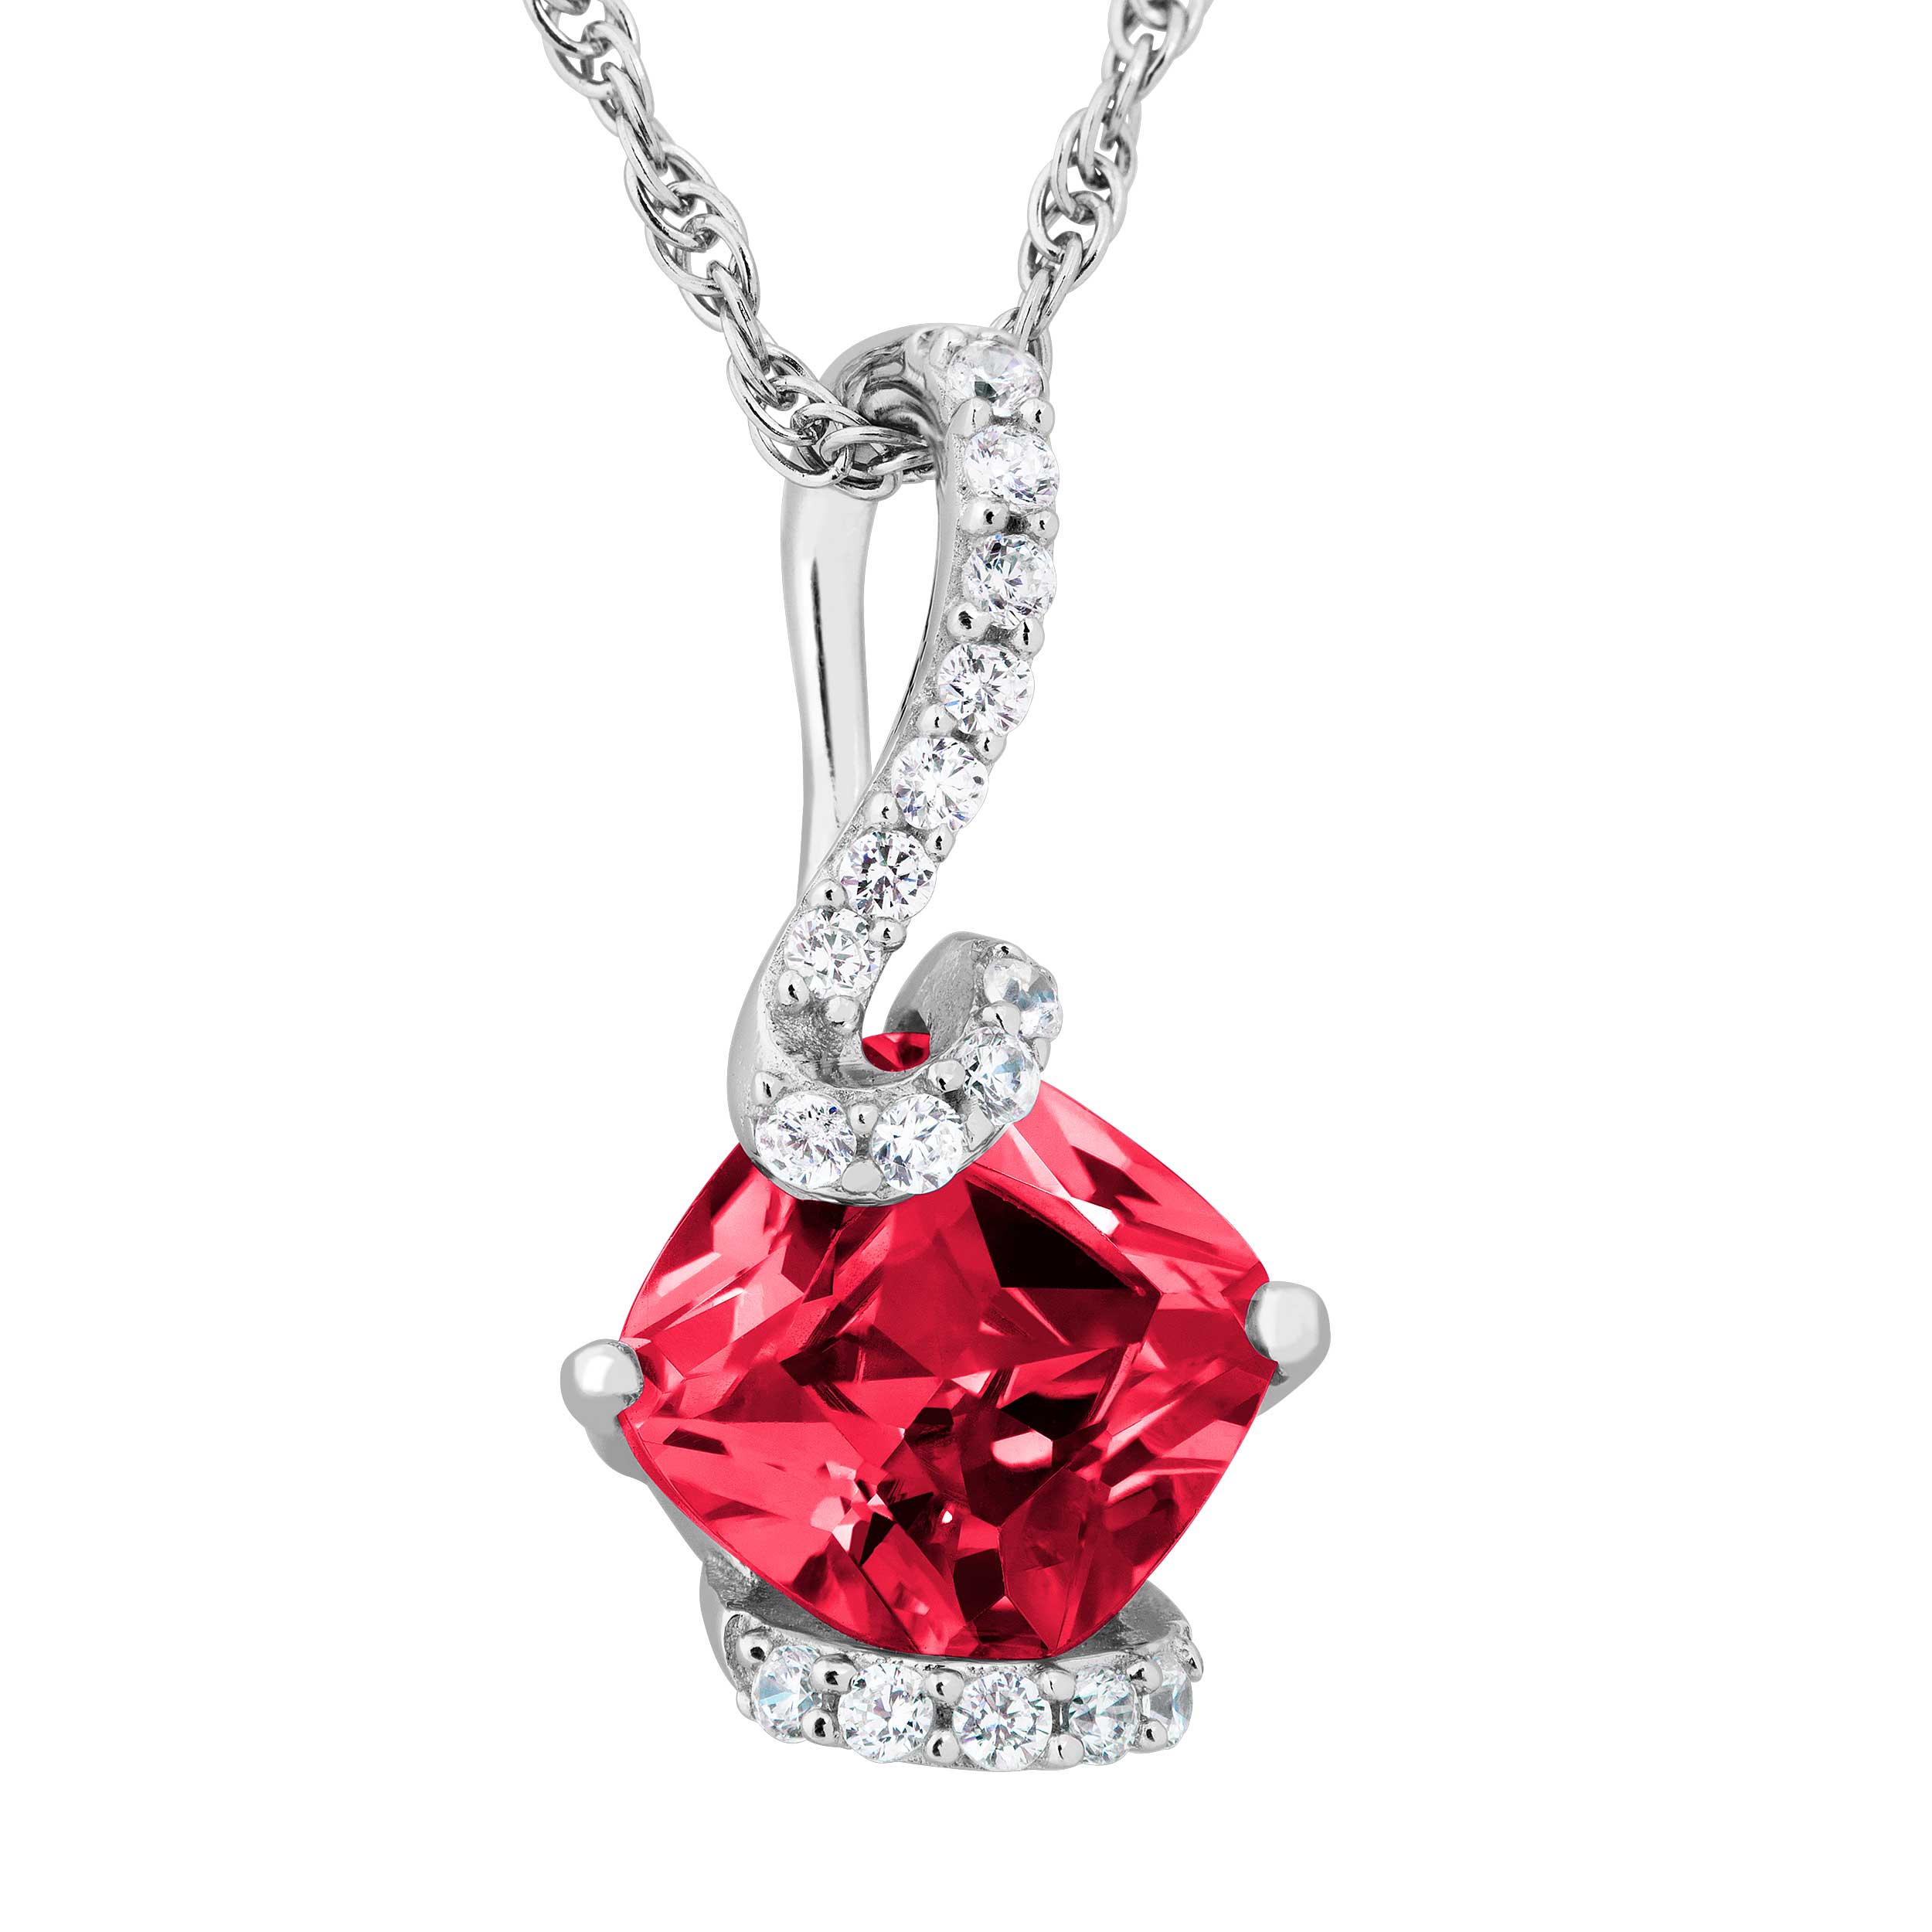 Cushion-Cut Created Ruby and White Topaz Pendant Necklace, Rhodium Plated Sterling Silver